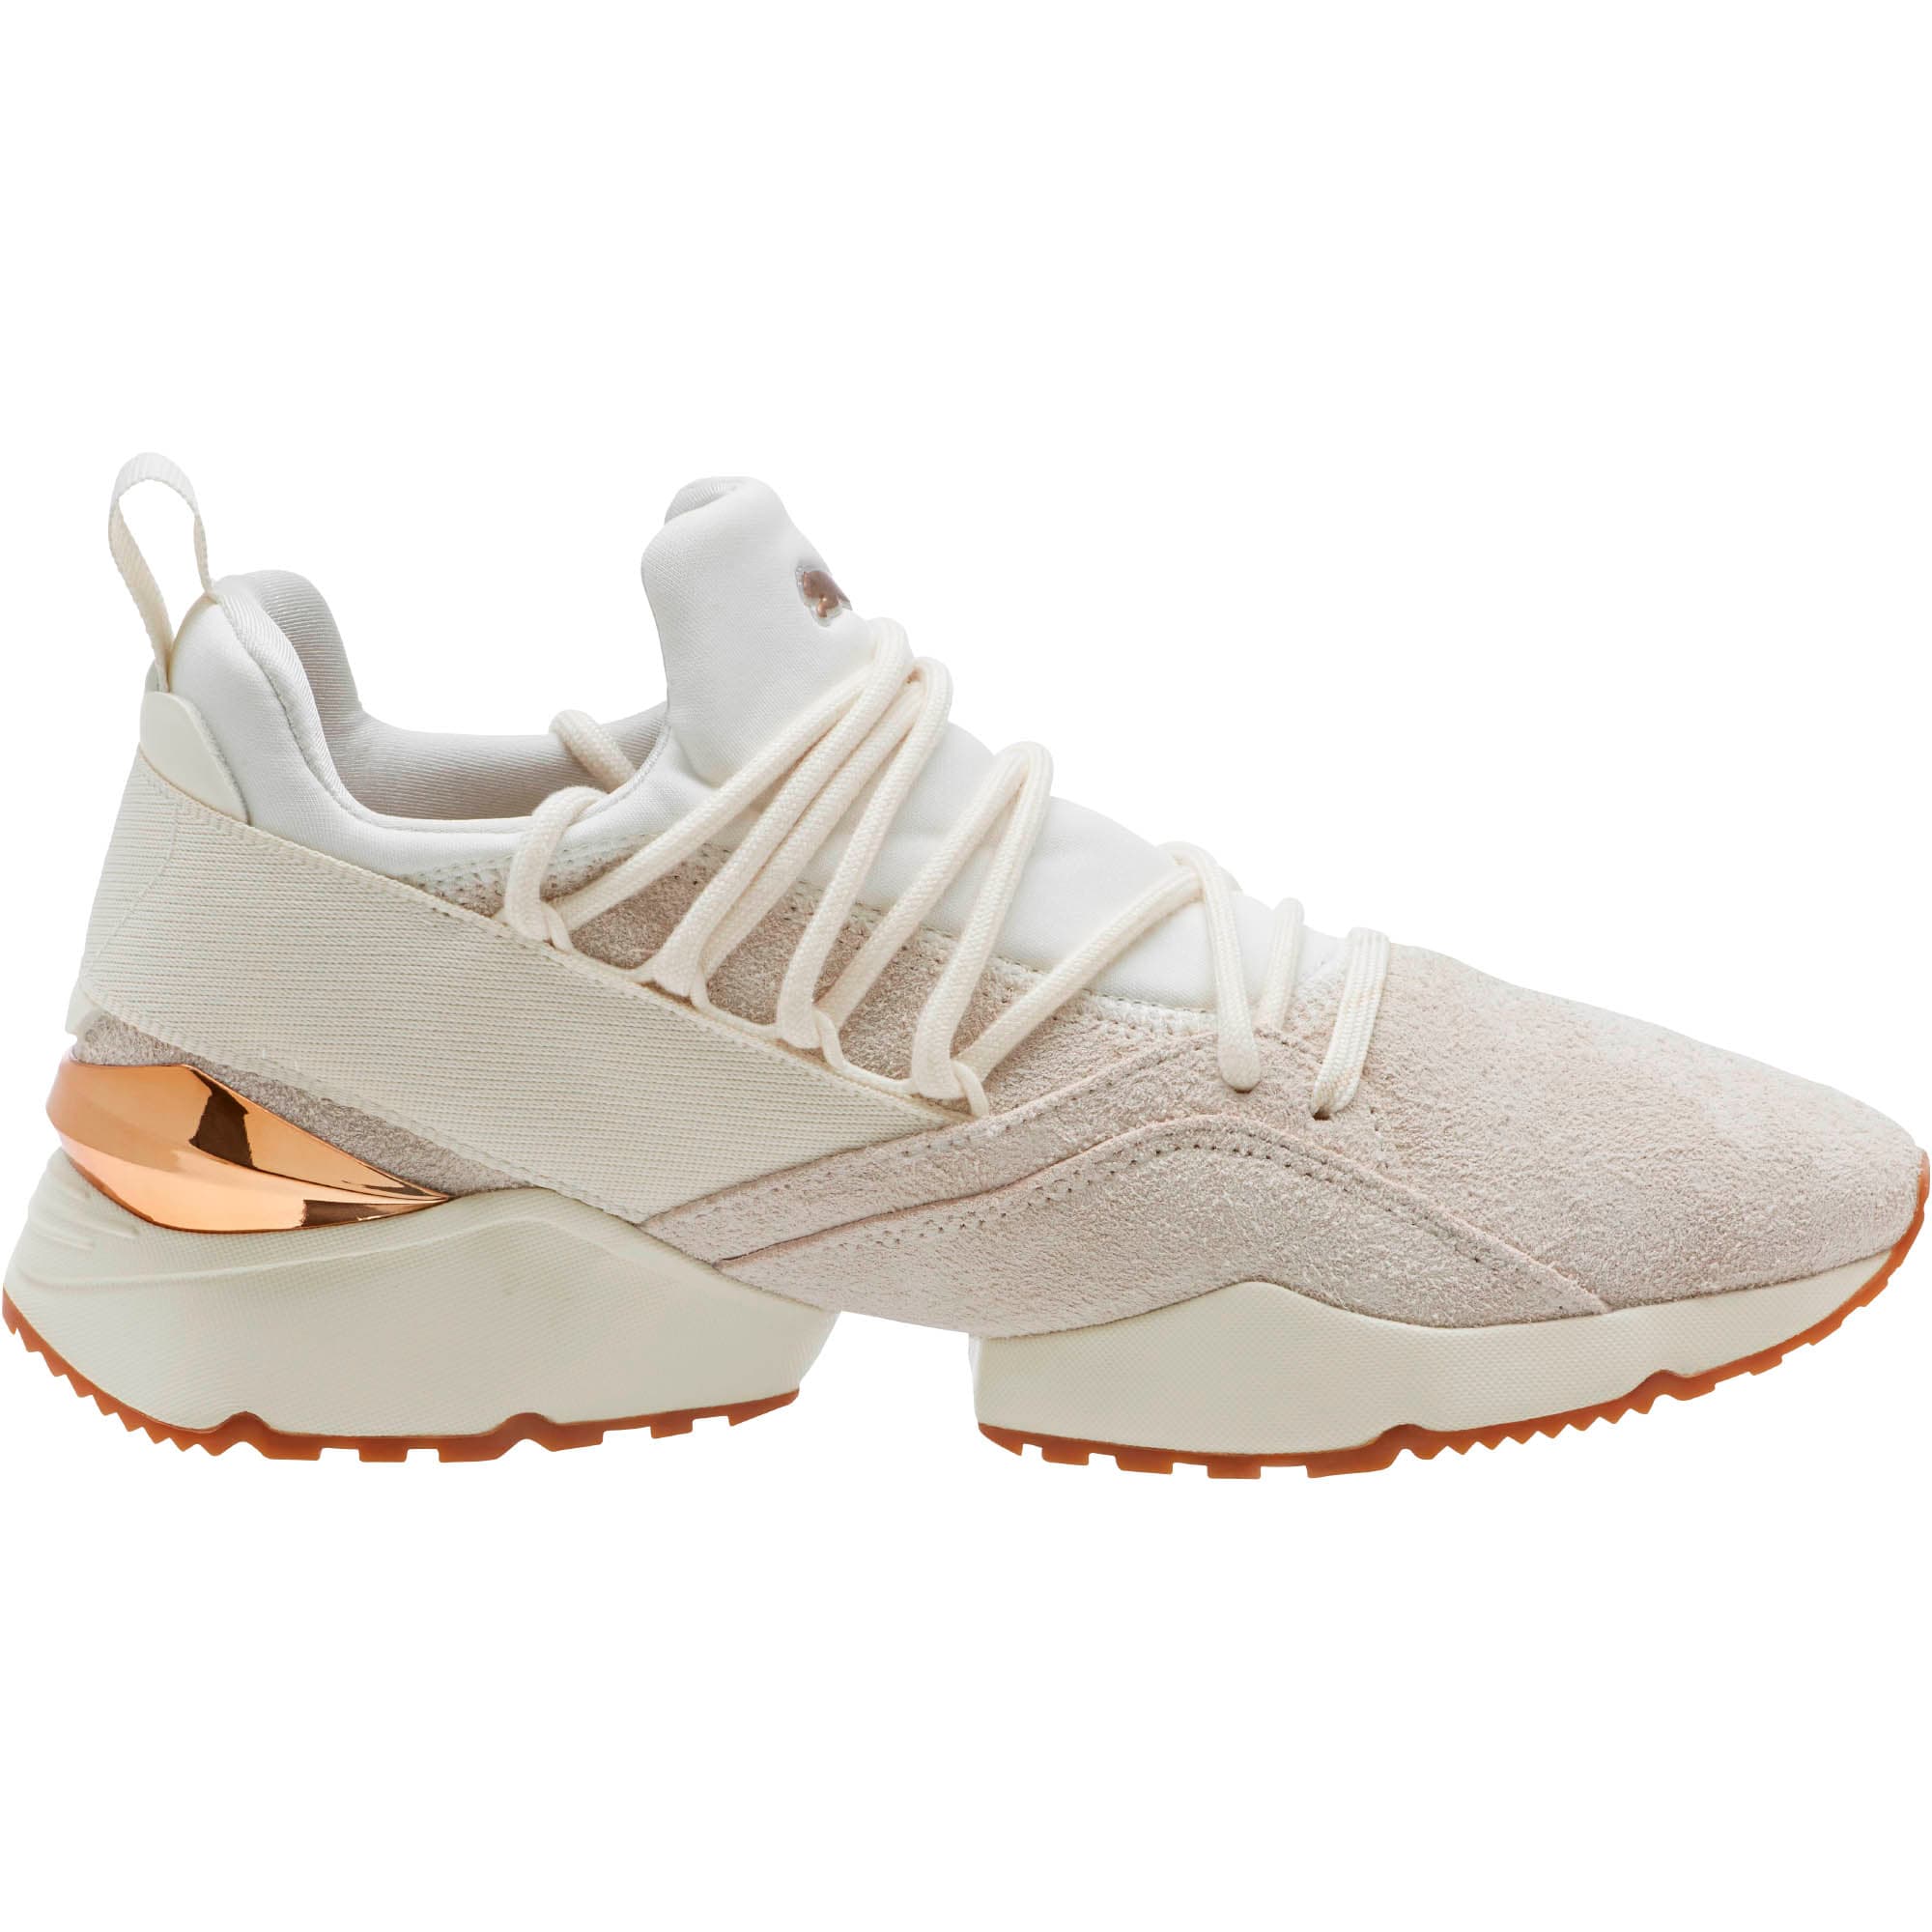 muse maia util women's sneakers